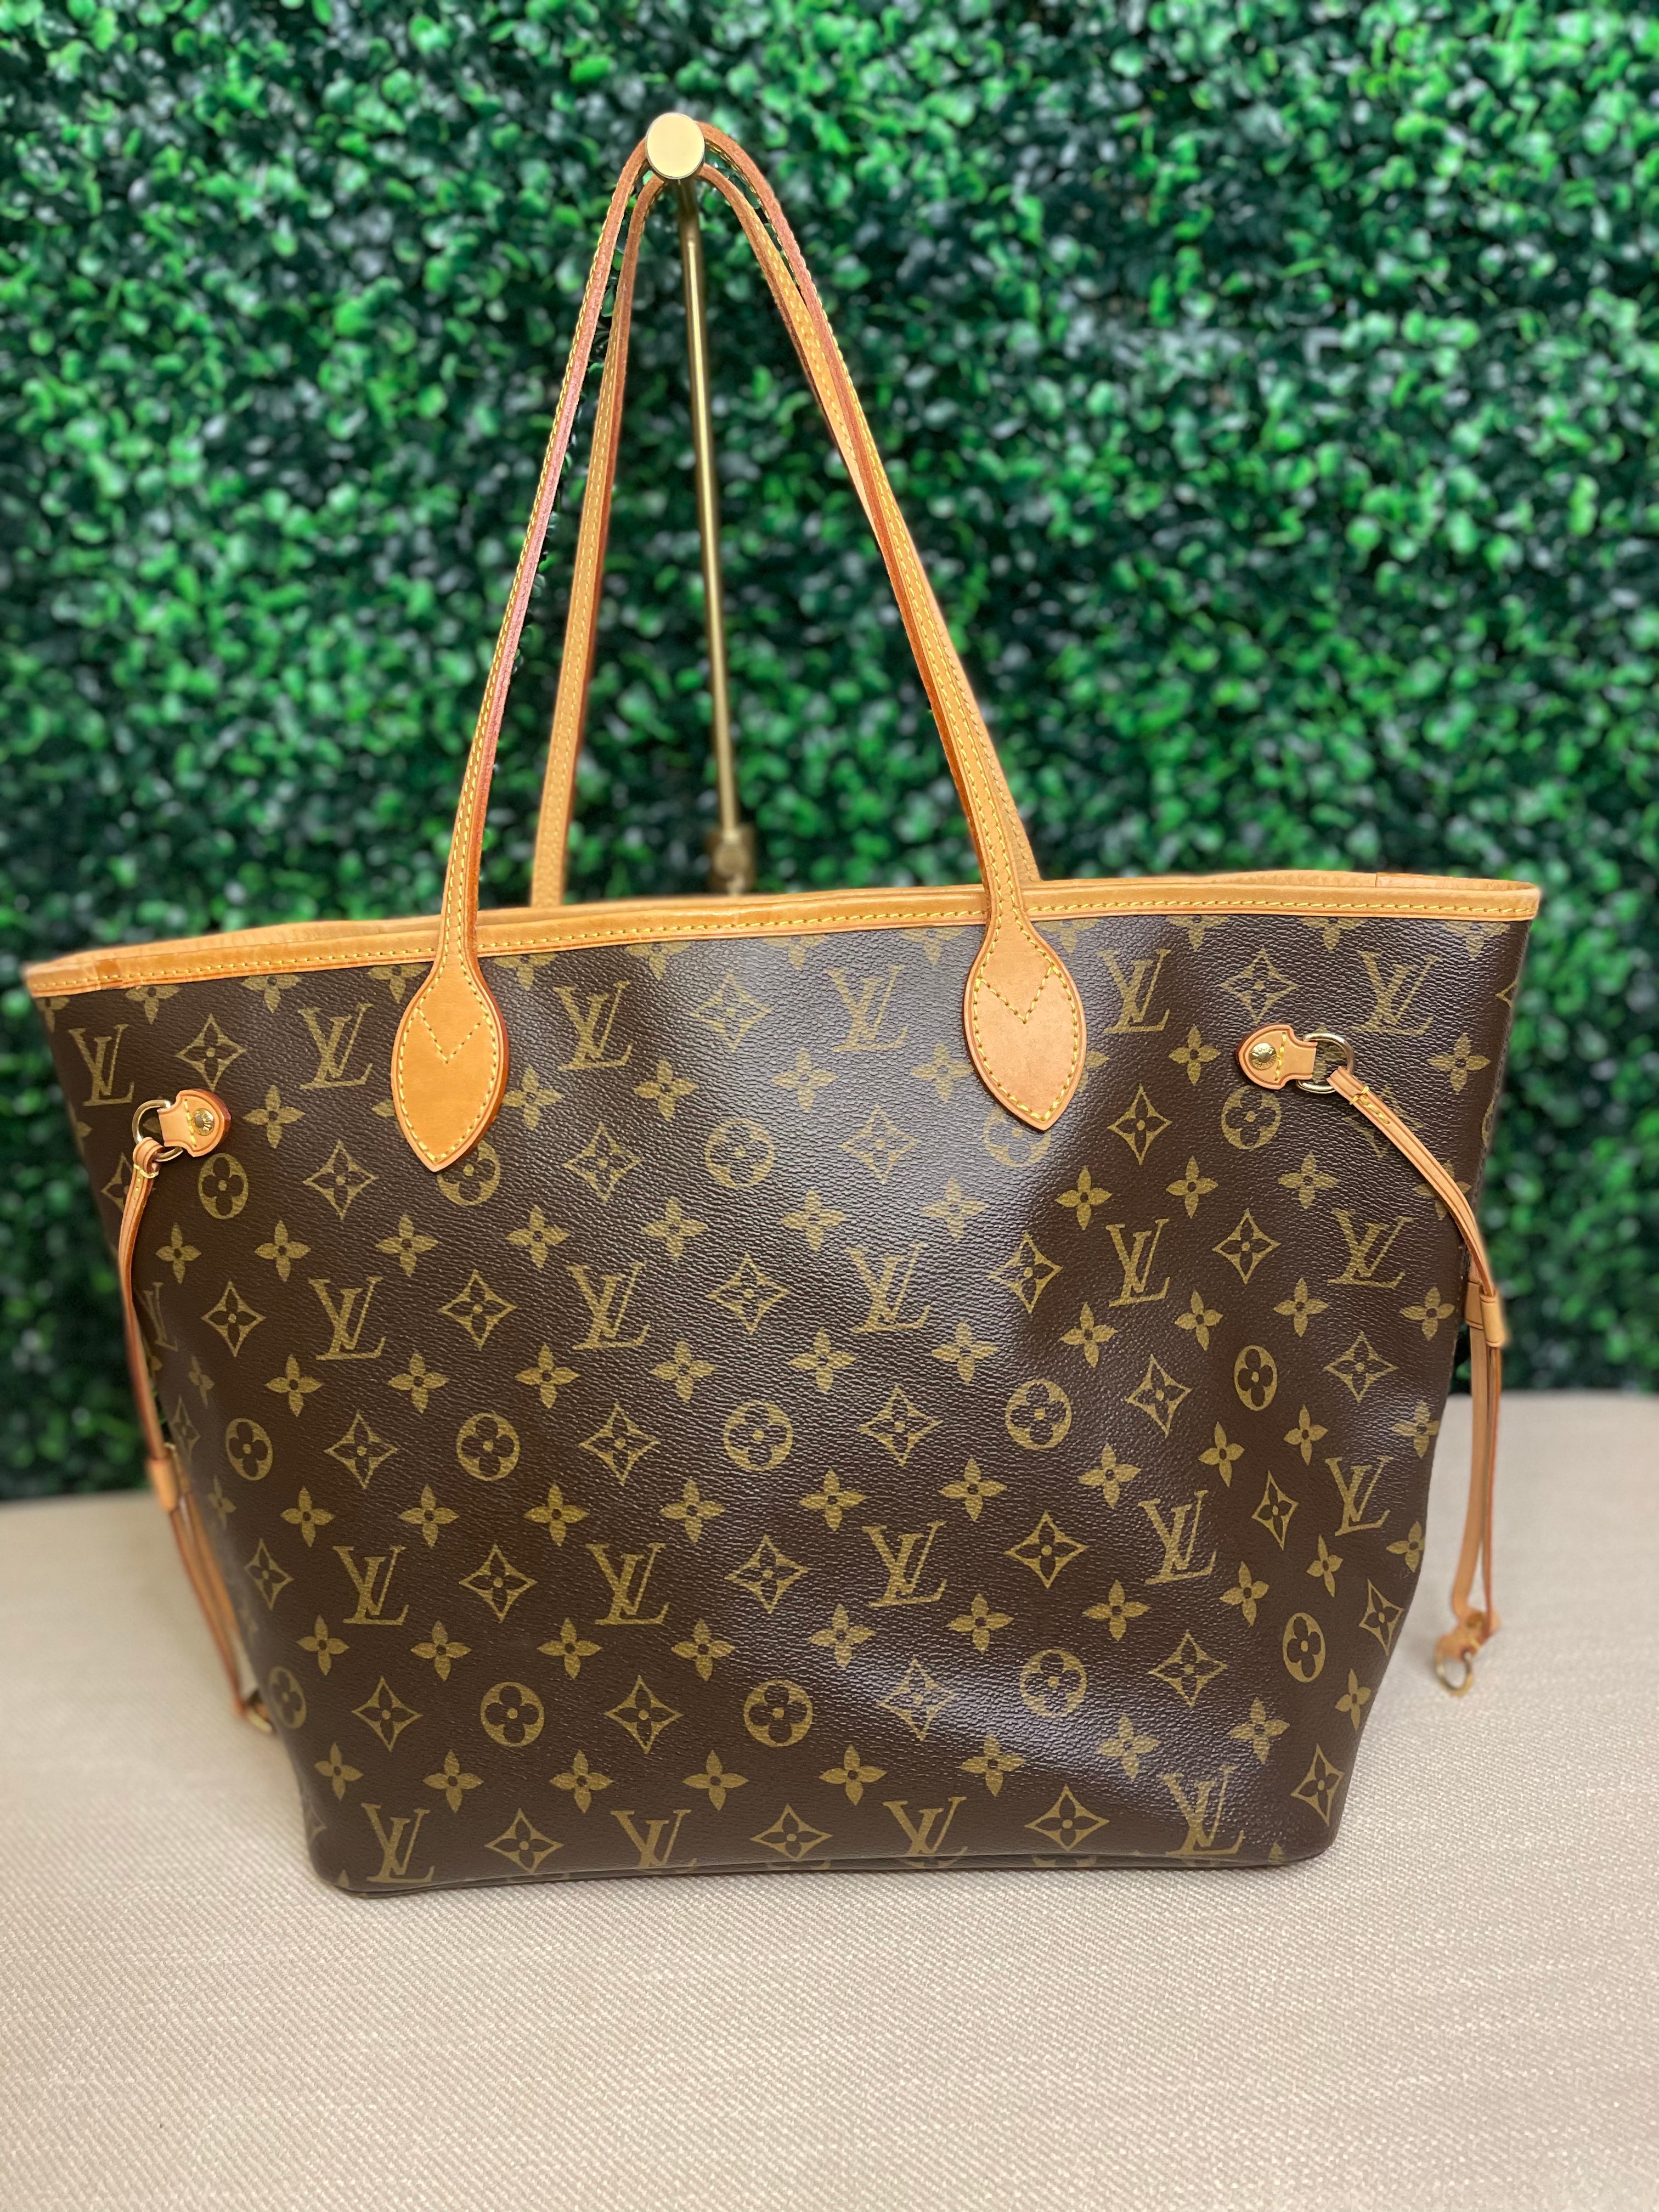 Stunning vintage condition Neverfull MM